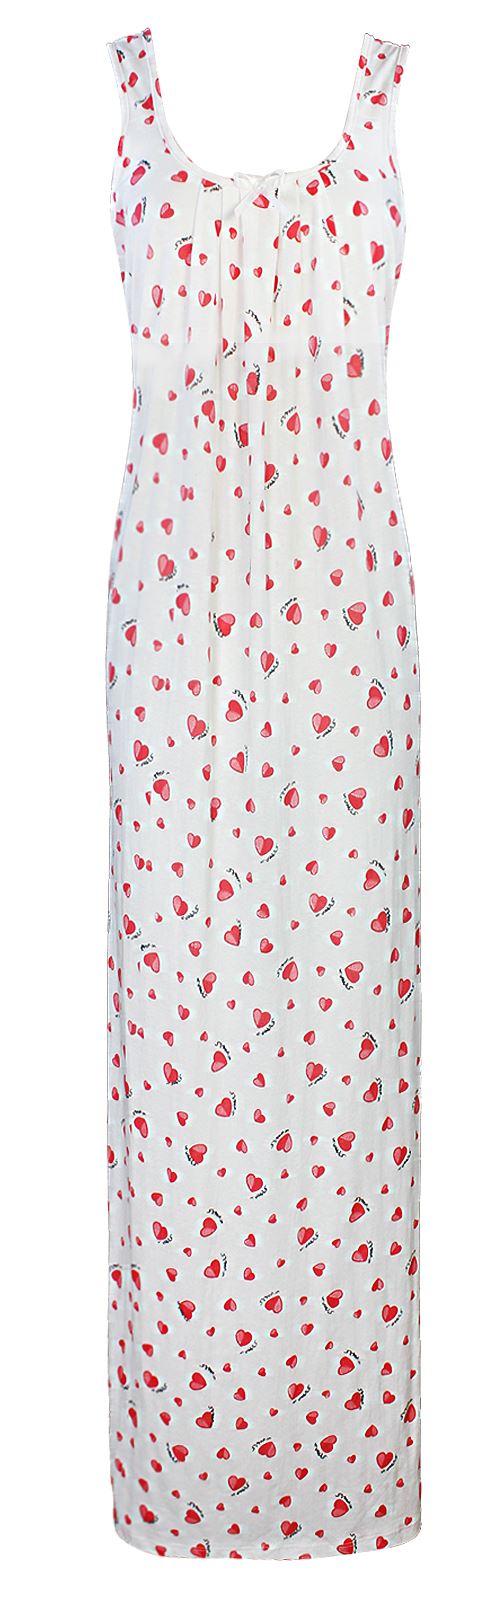 Red / One Size Cotton Nighty Slip Heart Print / Plain Night Gown Free Size The Orange Tags